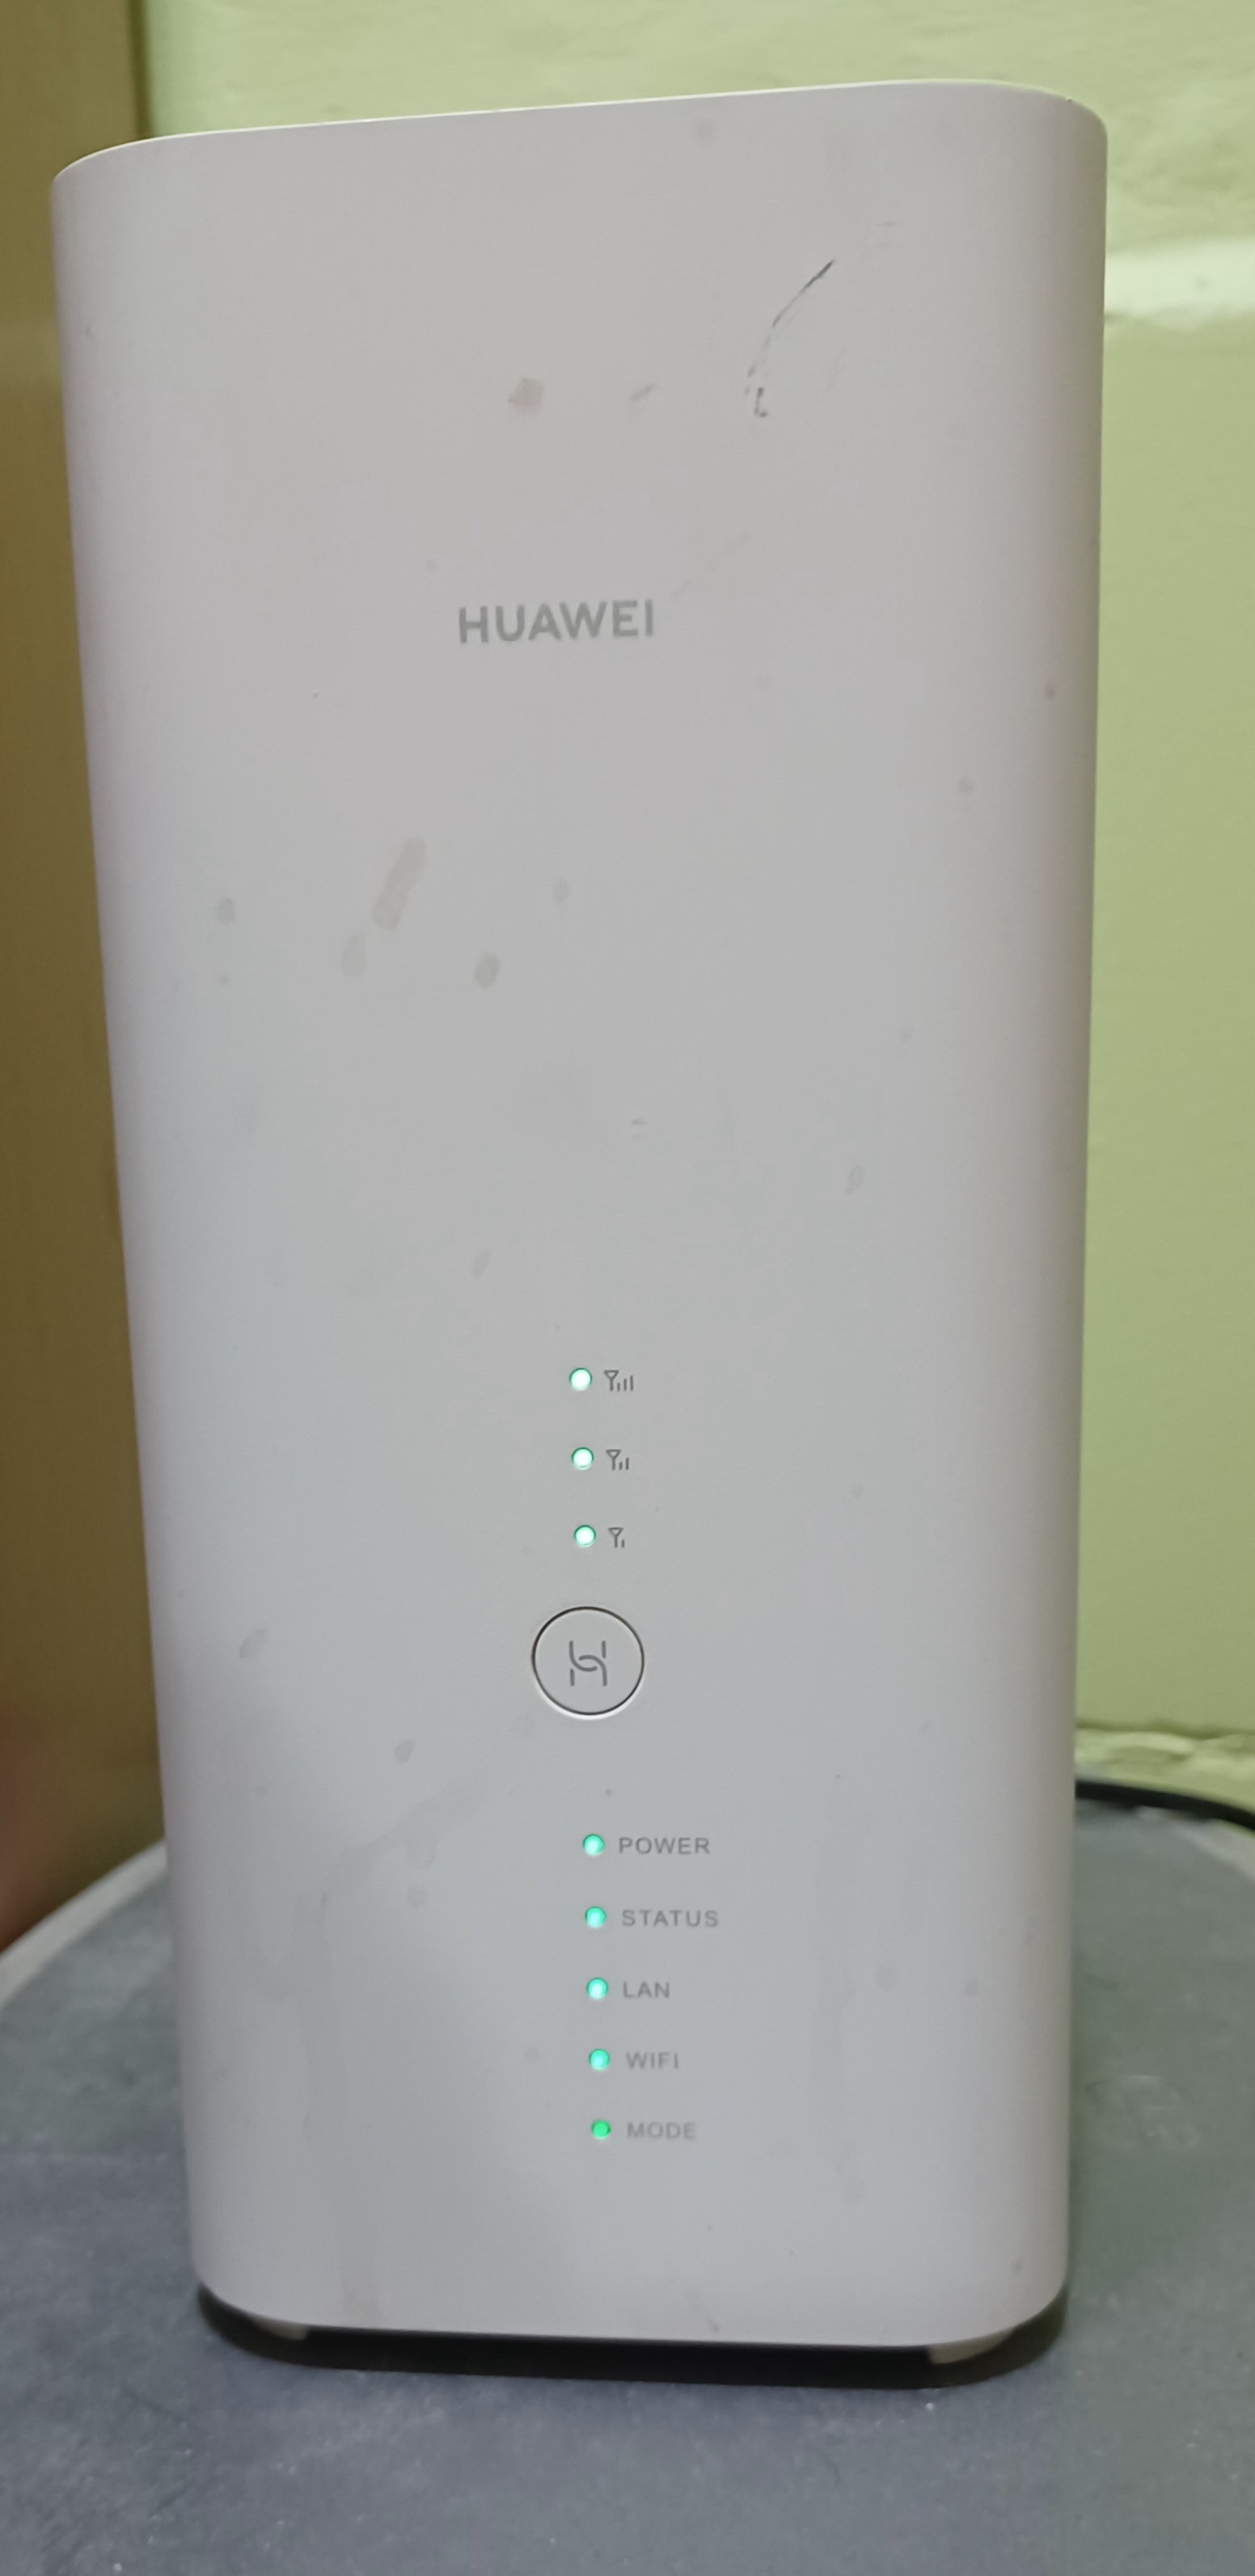 HUAWEI B818-260 tower router for sale 15 KWD